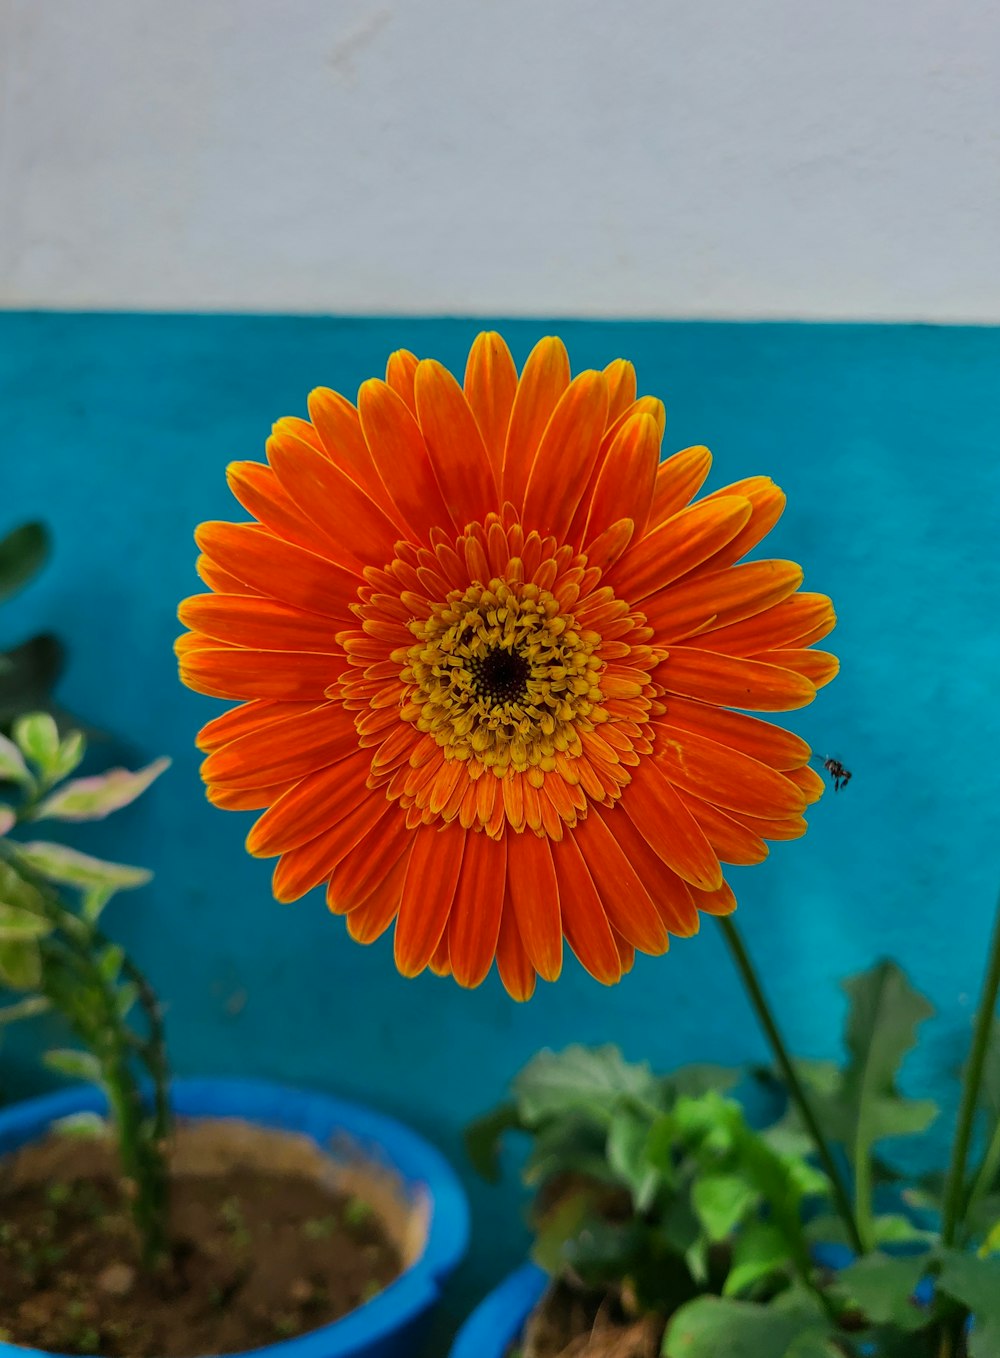 a flower with a yellow center